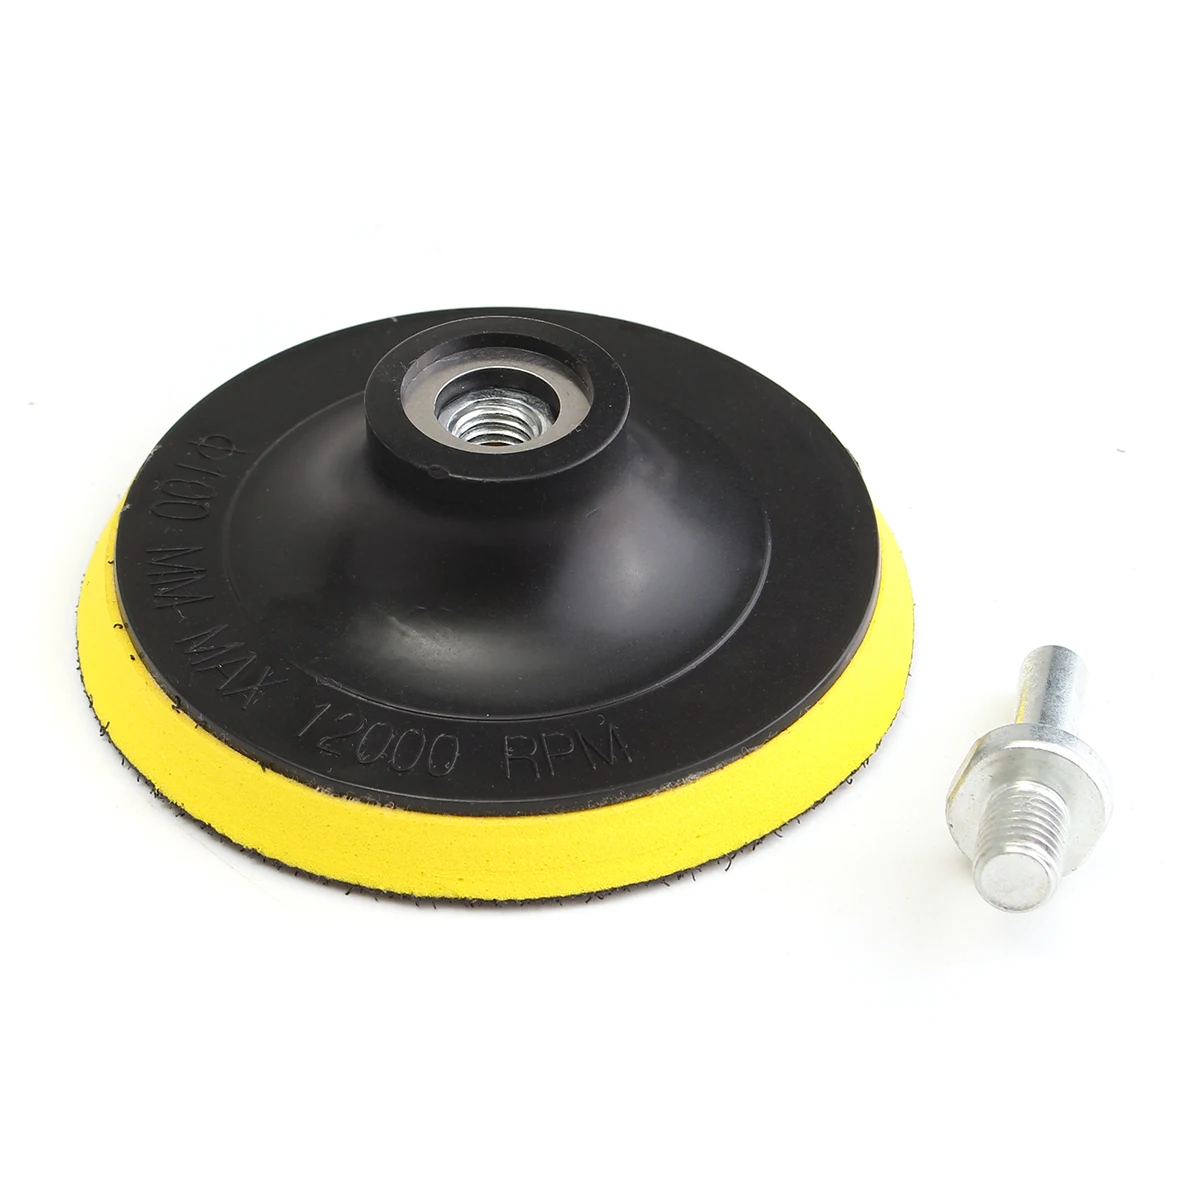 1000 Grit 10x Sanding Disc Sandpaper Hook And Loop Grit+Drill Adapter+Backer Pad 